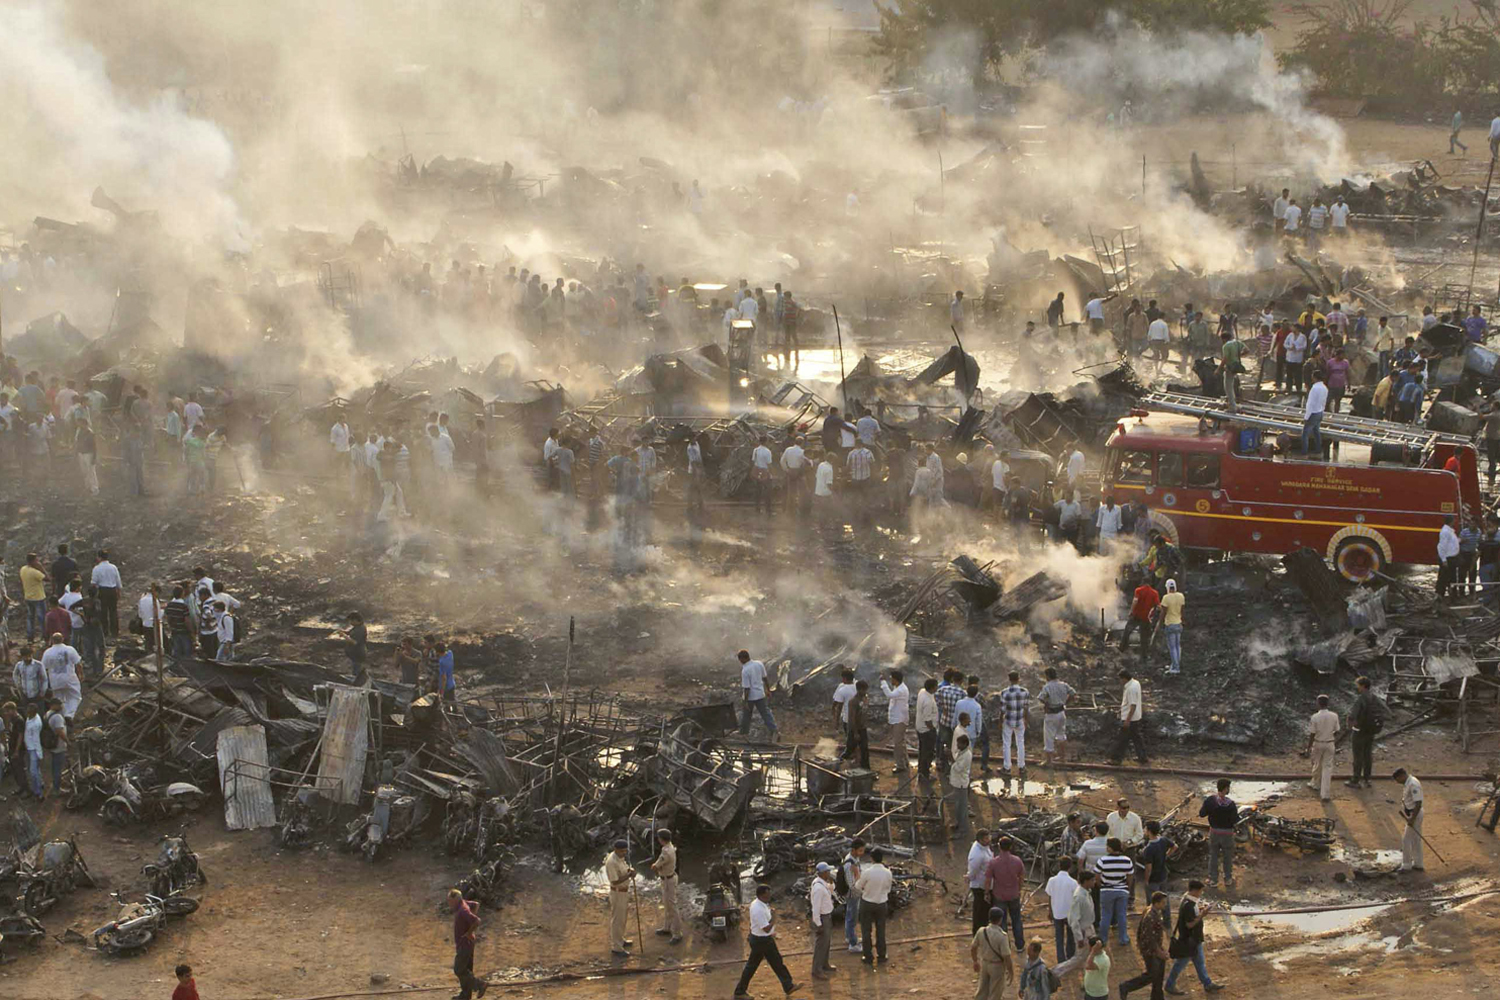 Image: Nov. 10, 2012. People gather at the site of a firecracker market that was destroyed in a fire in Vadodara, India.